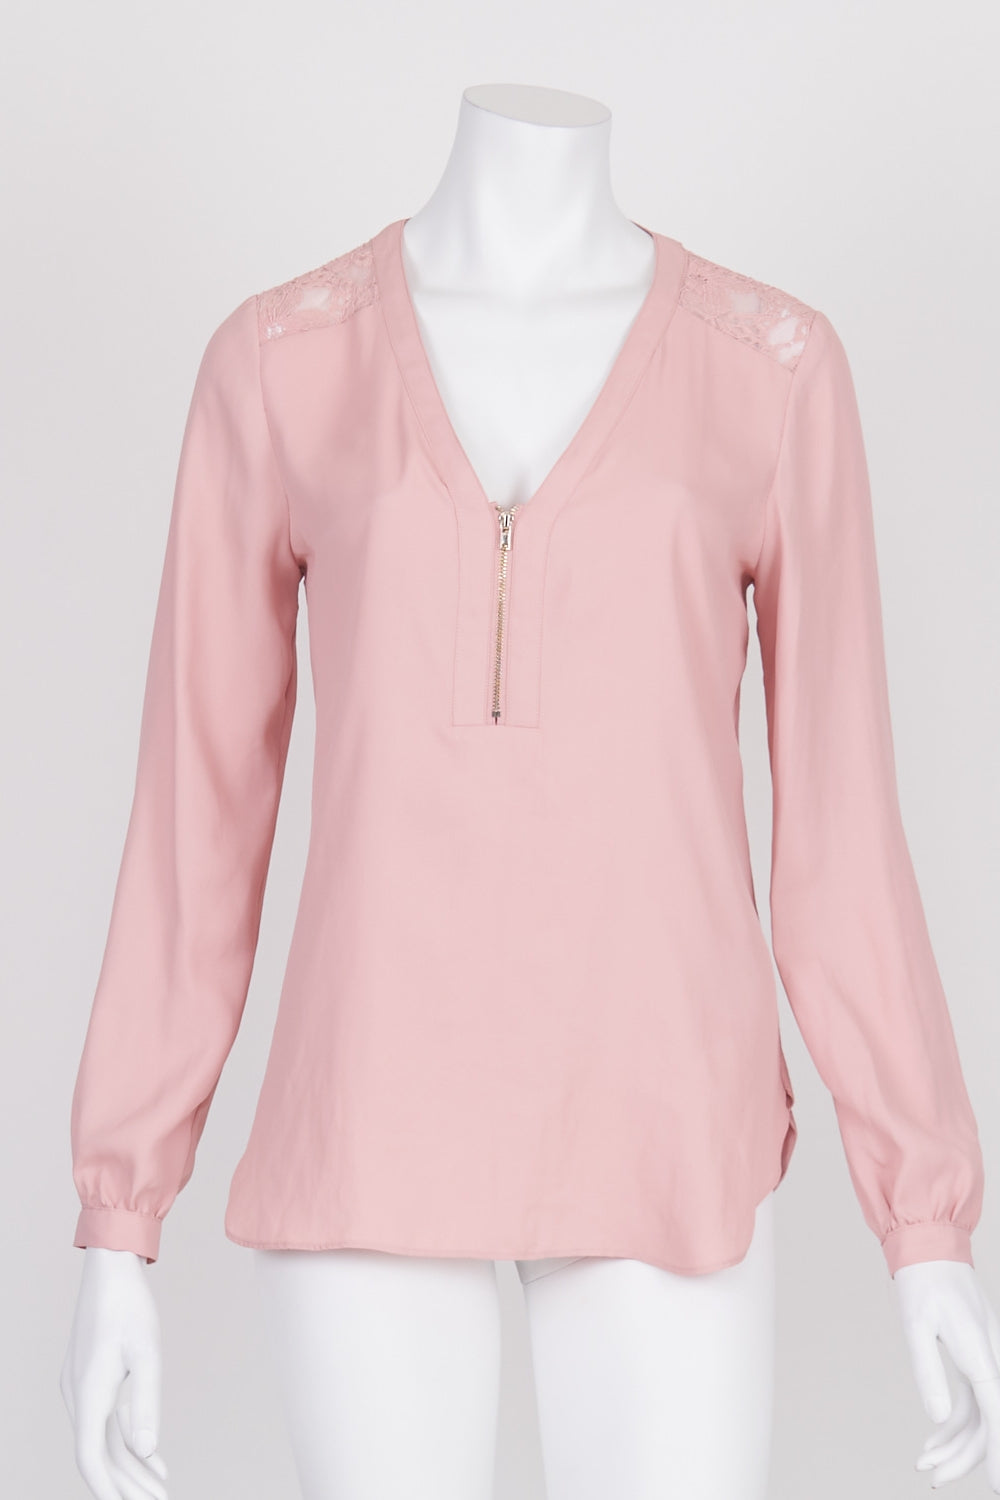 Forever New Pink Long Sleeve Top XS